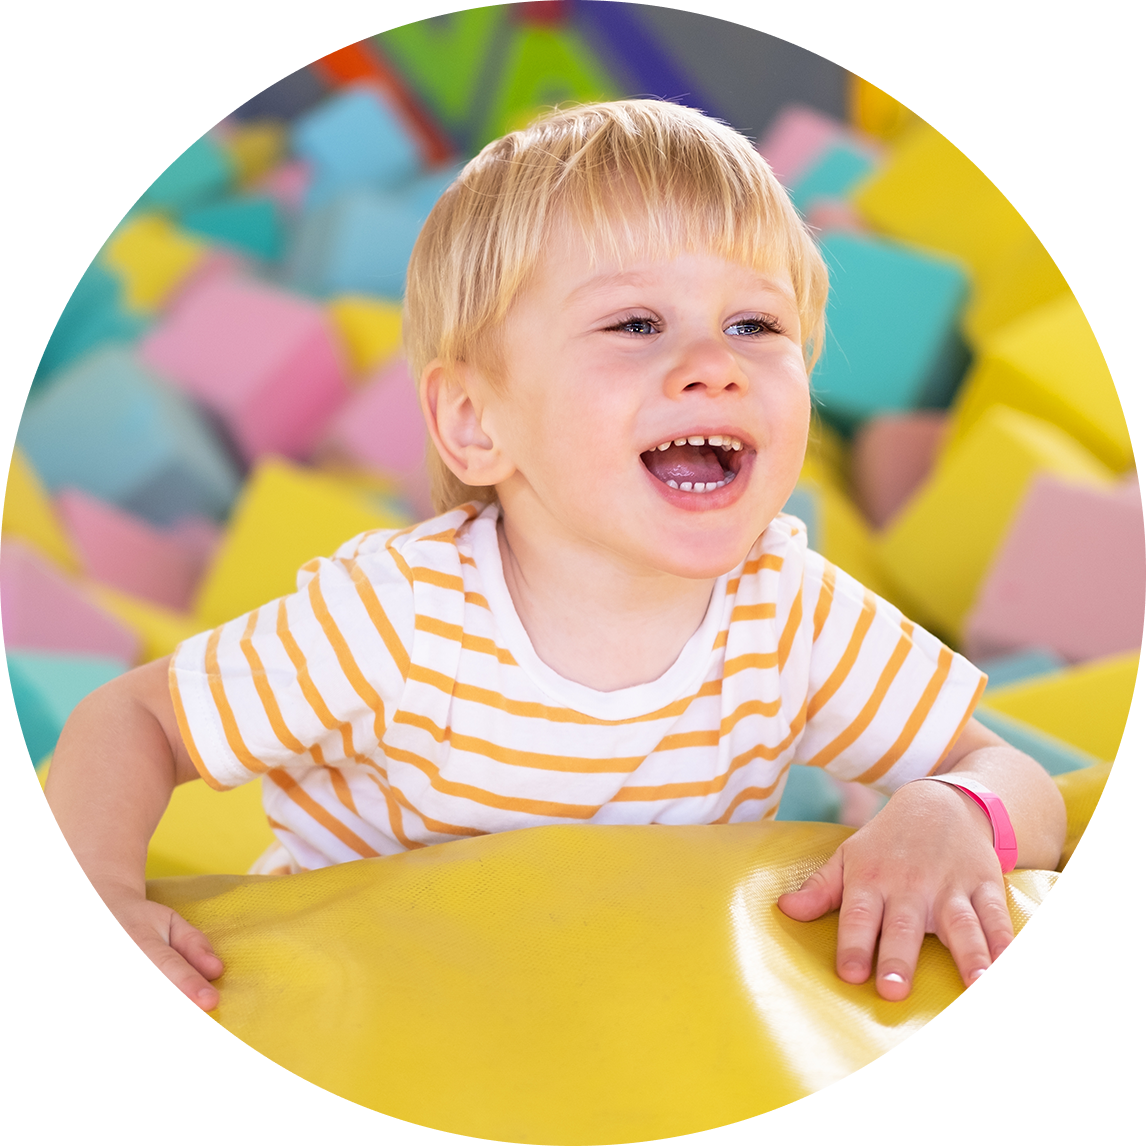 Roarsome Play Centre - All You Need to Know BEFORE You Go (with